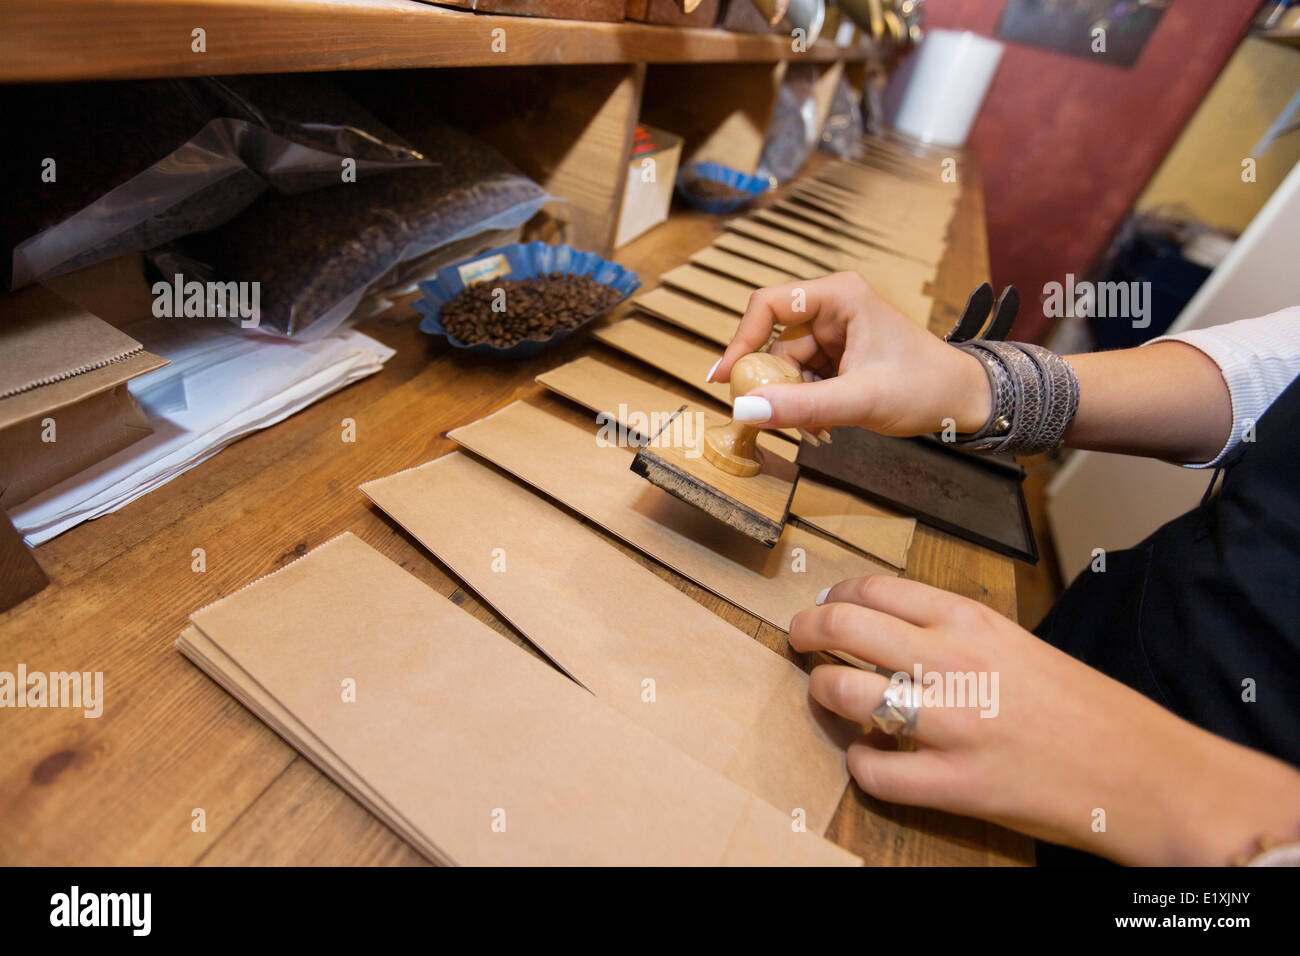 Cropped image of salesperson stamping paper bags at coffee store Stock Photo